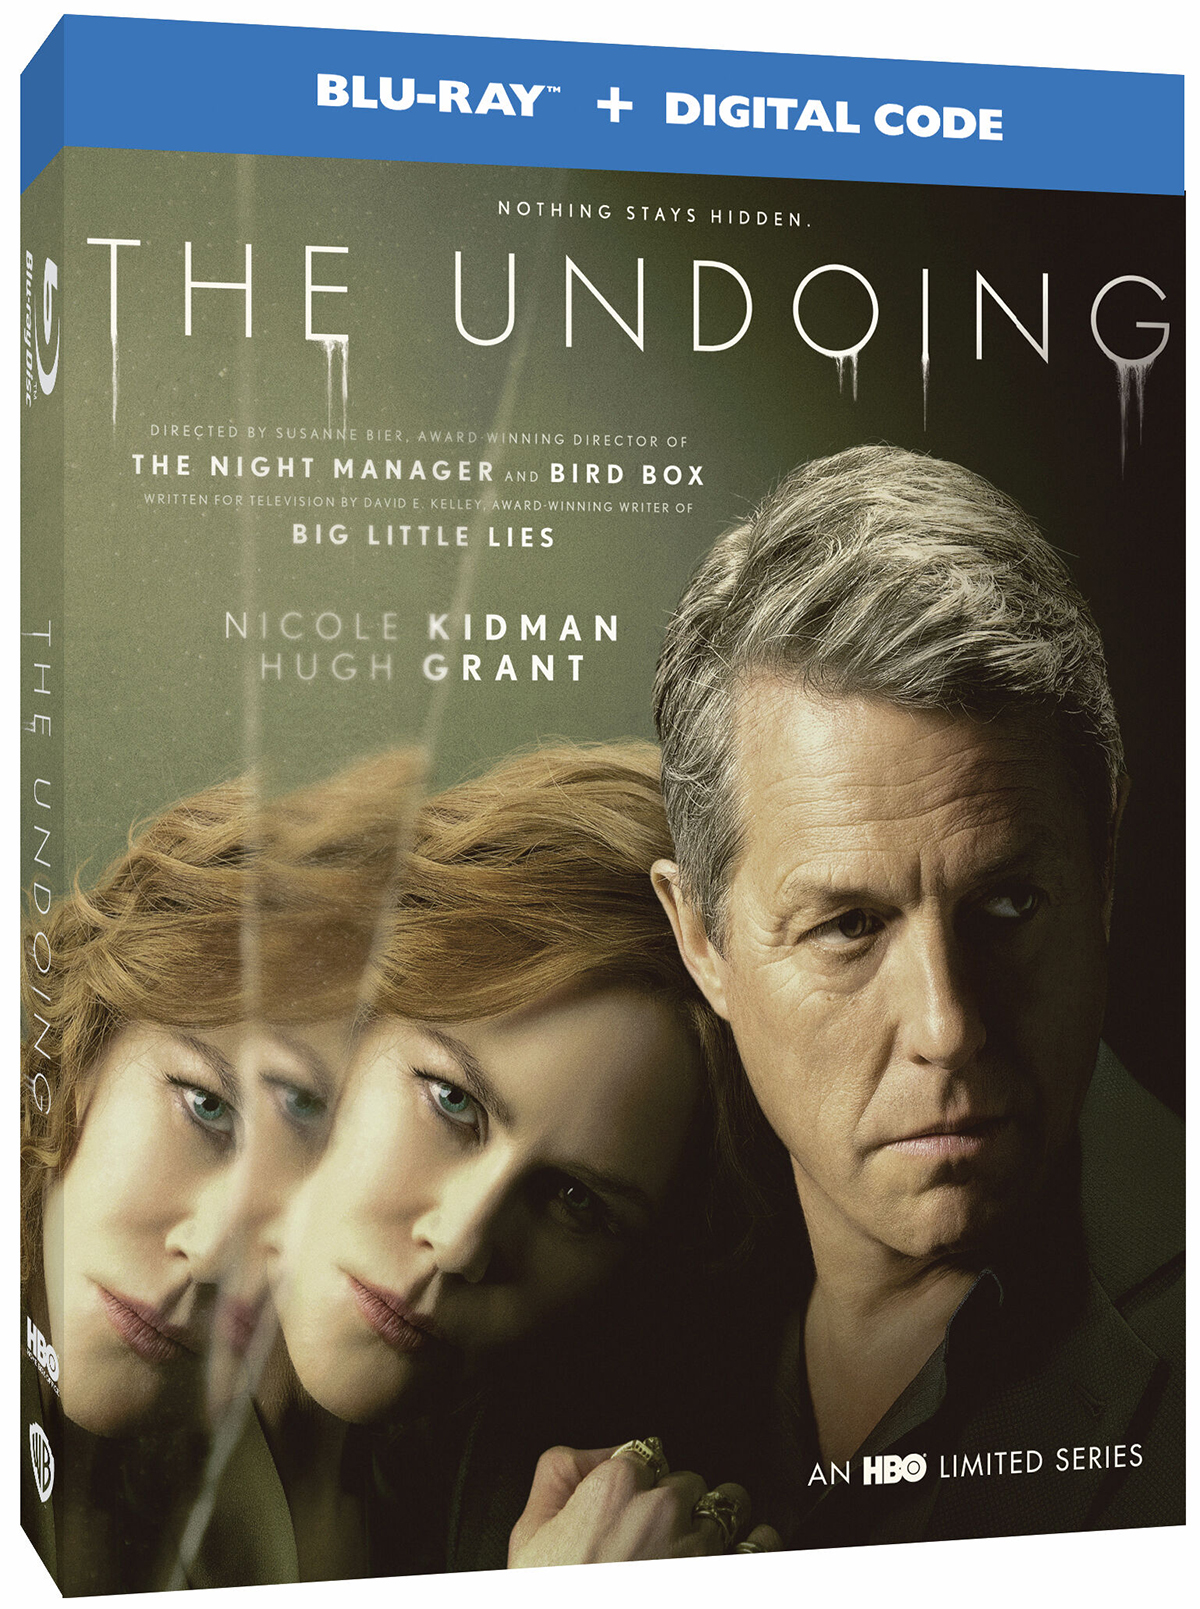 The Undoing: An HBO Limited Series